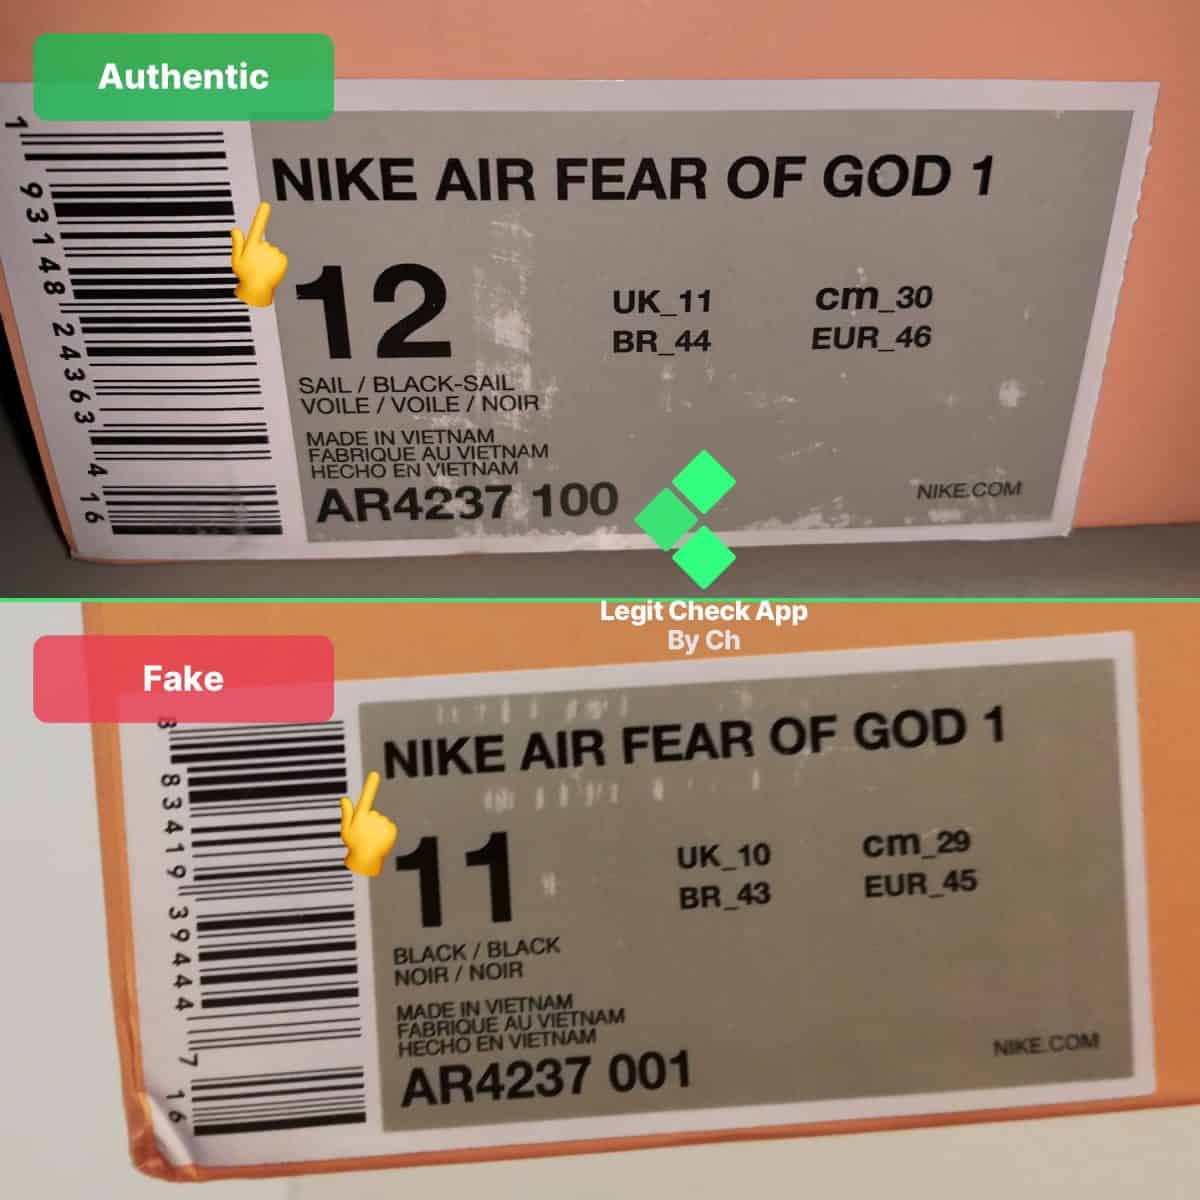 How To Verify Nike Fear Of God 1 Authenticity